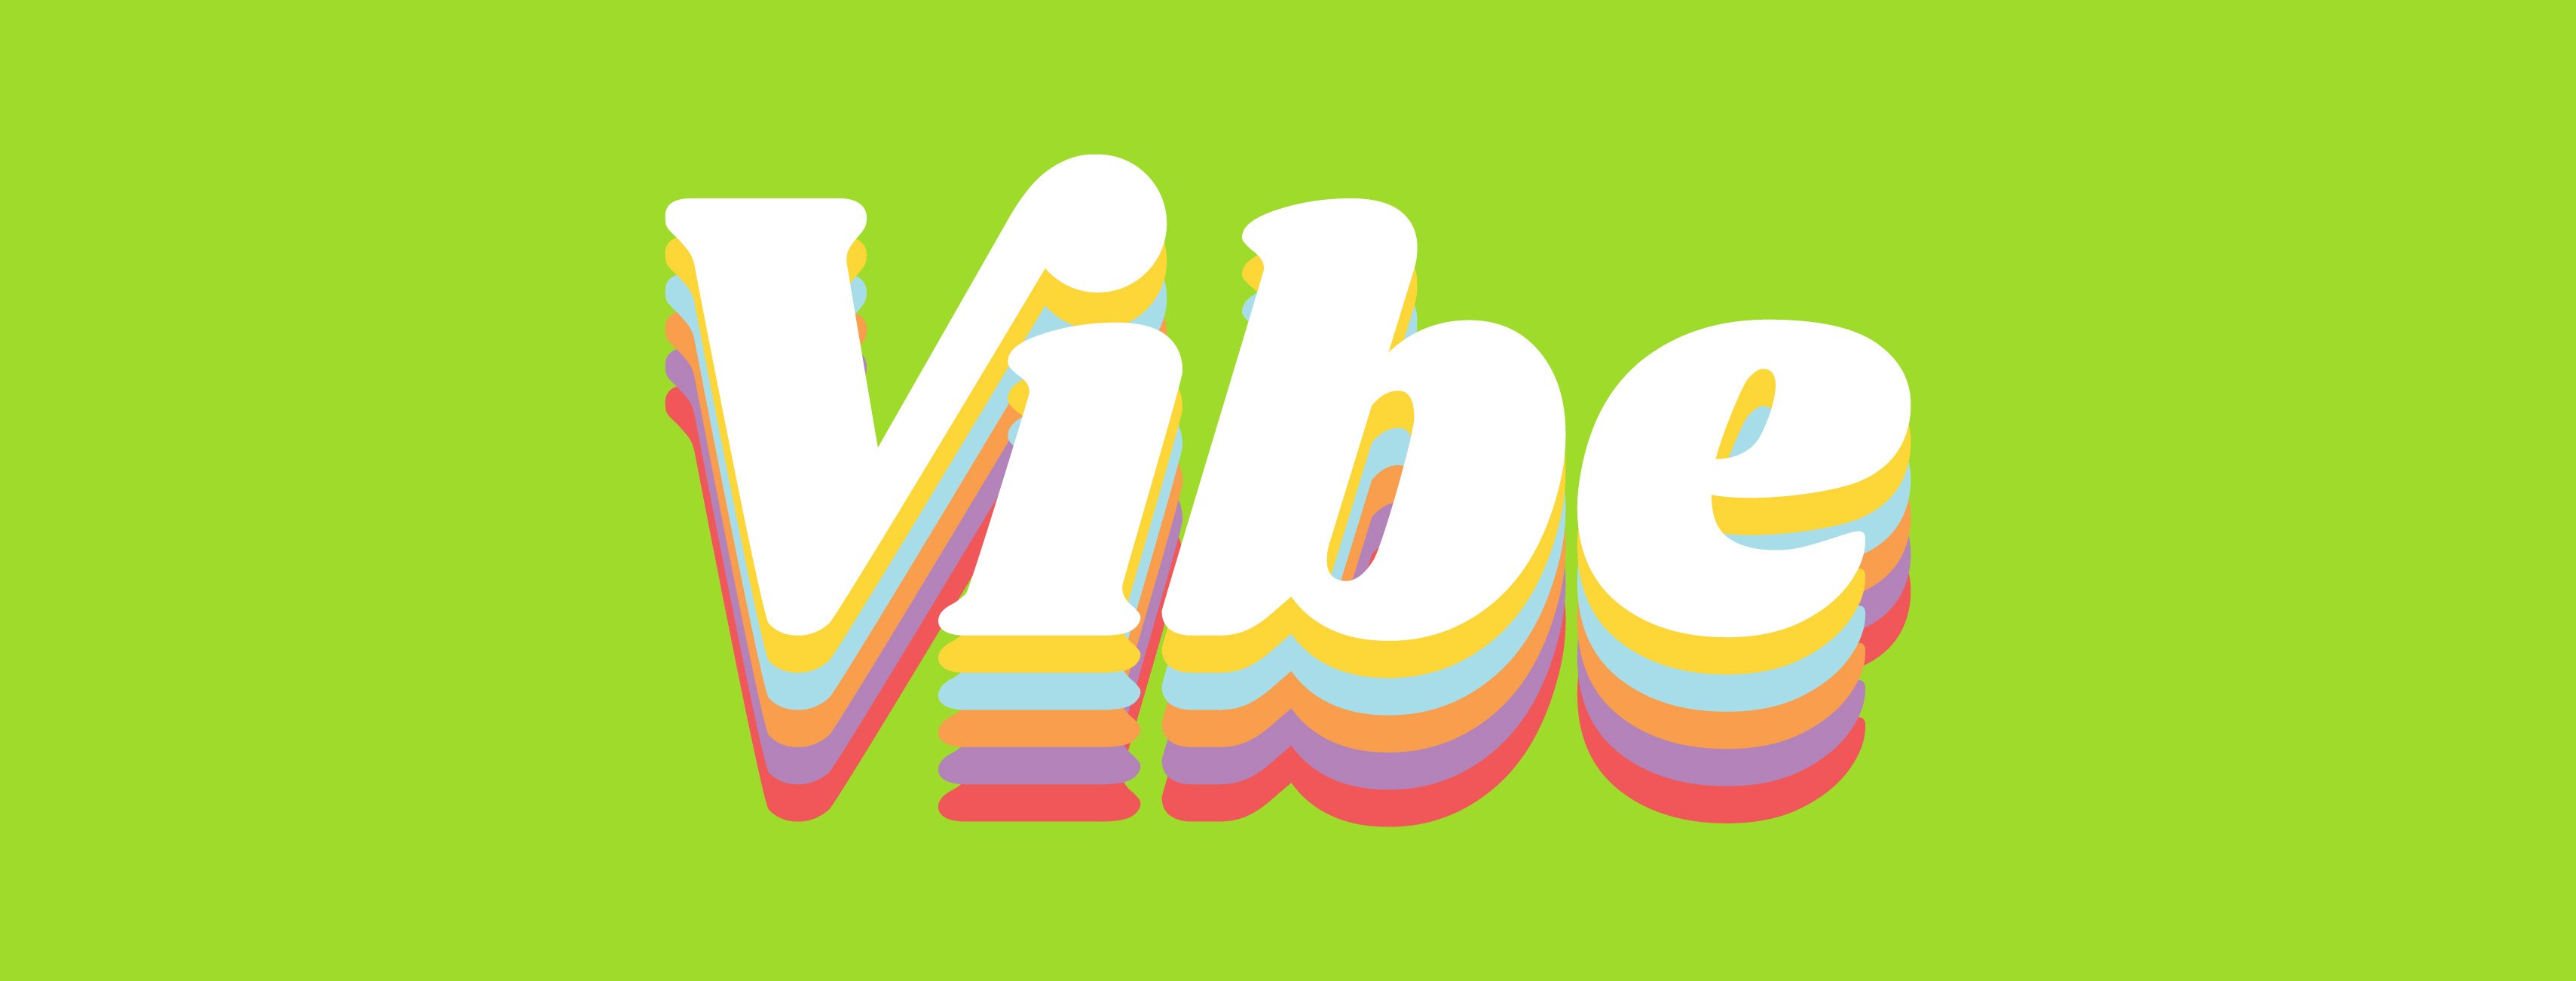 Vibe is a new way to ride, access mobile services, and save on everyday spending. It's time to get your Vibe on so come Vibe with me!